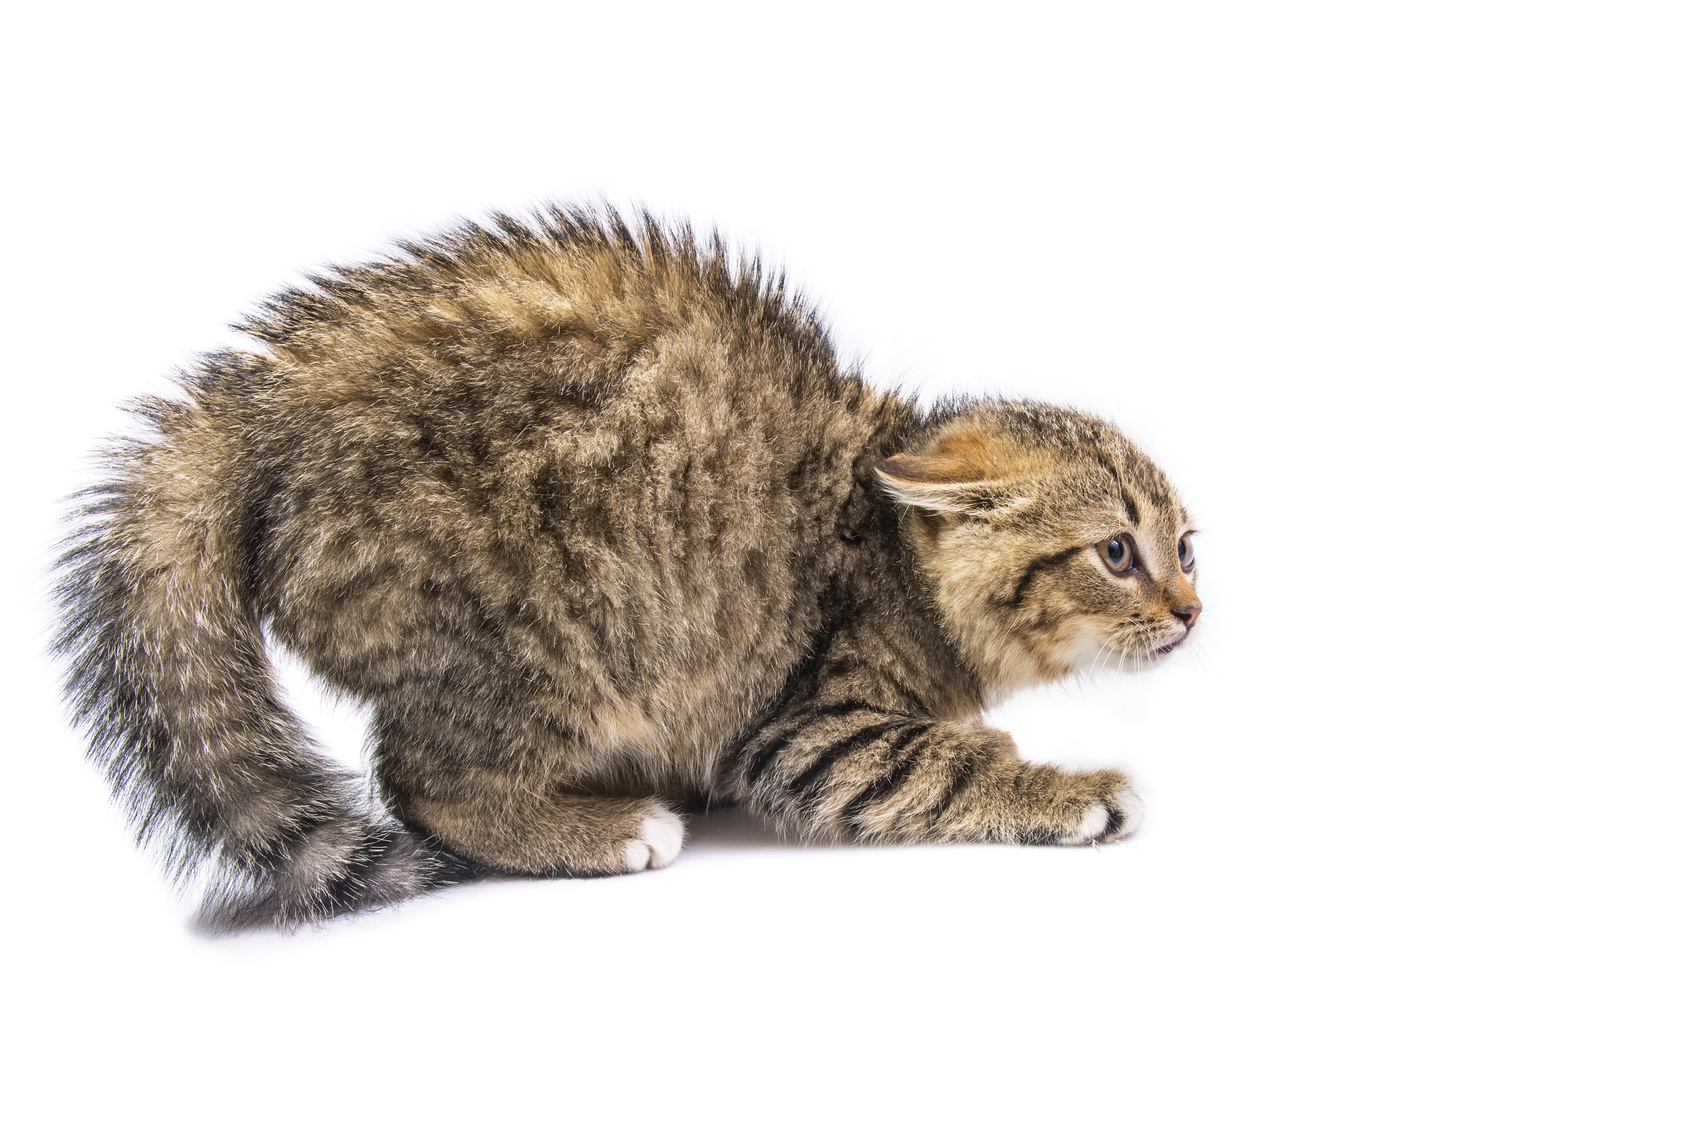 Scaredy Cat: Feline Anxiety and Related Issues - Animal Medical